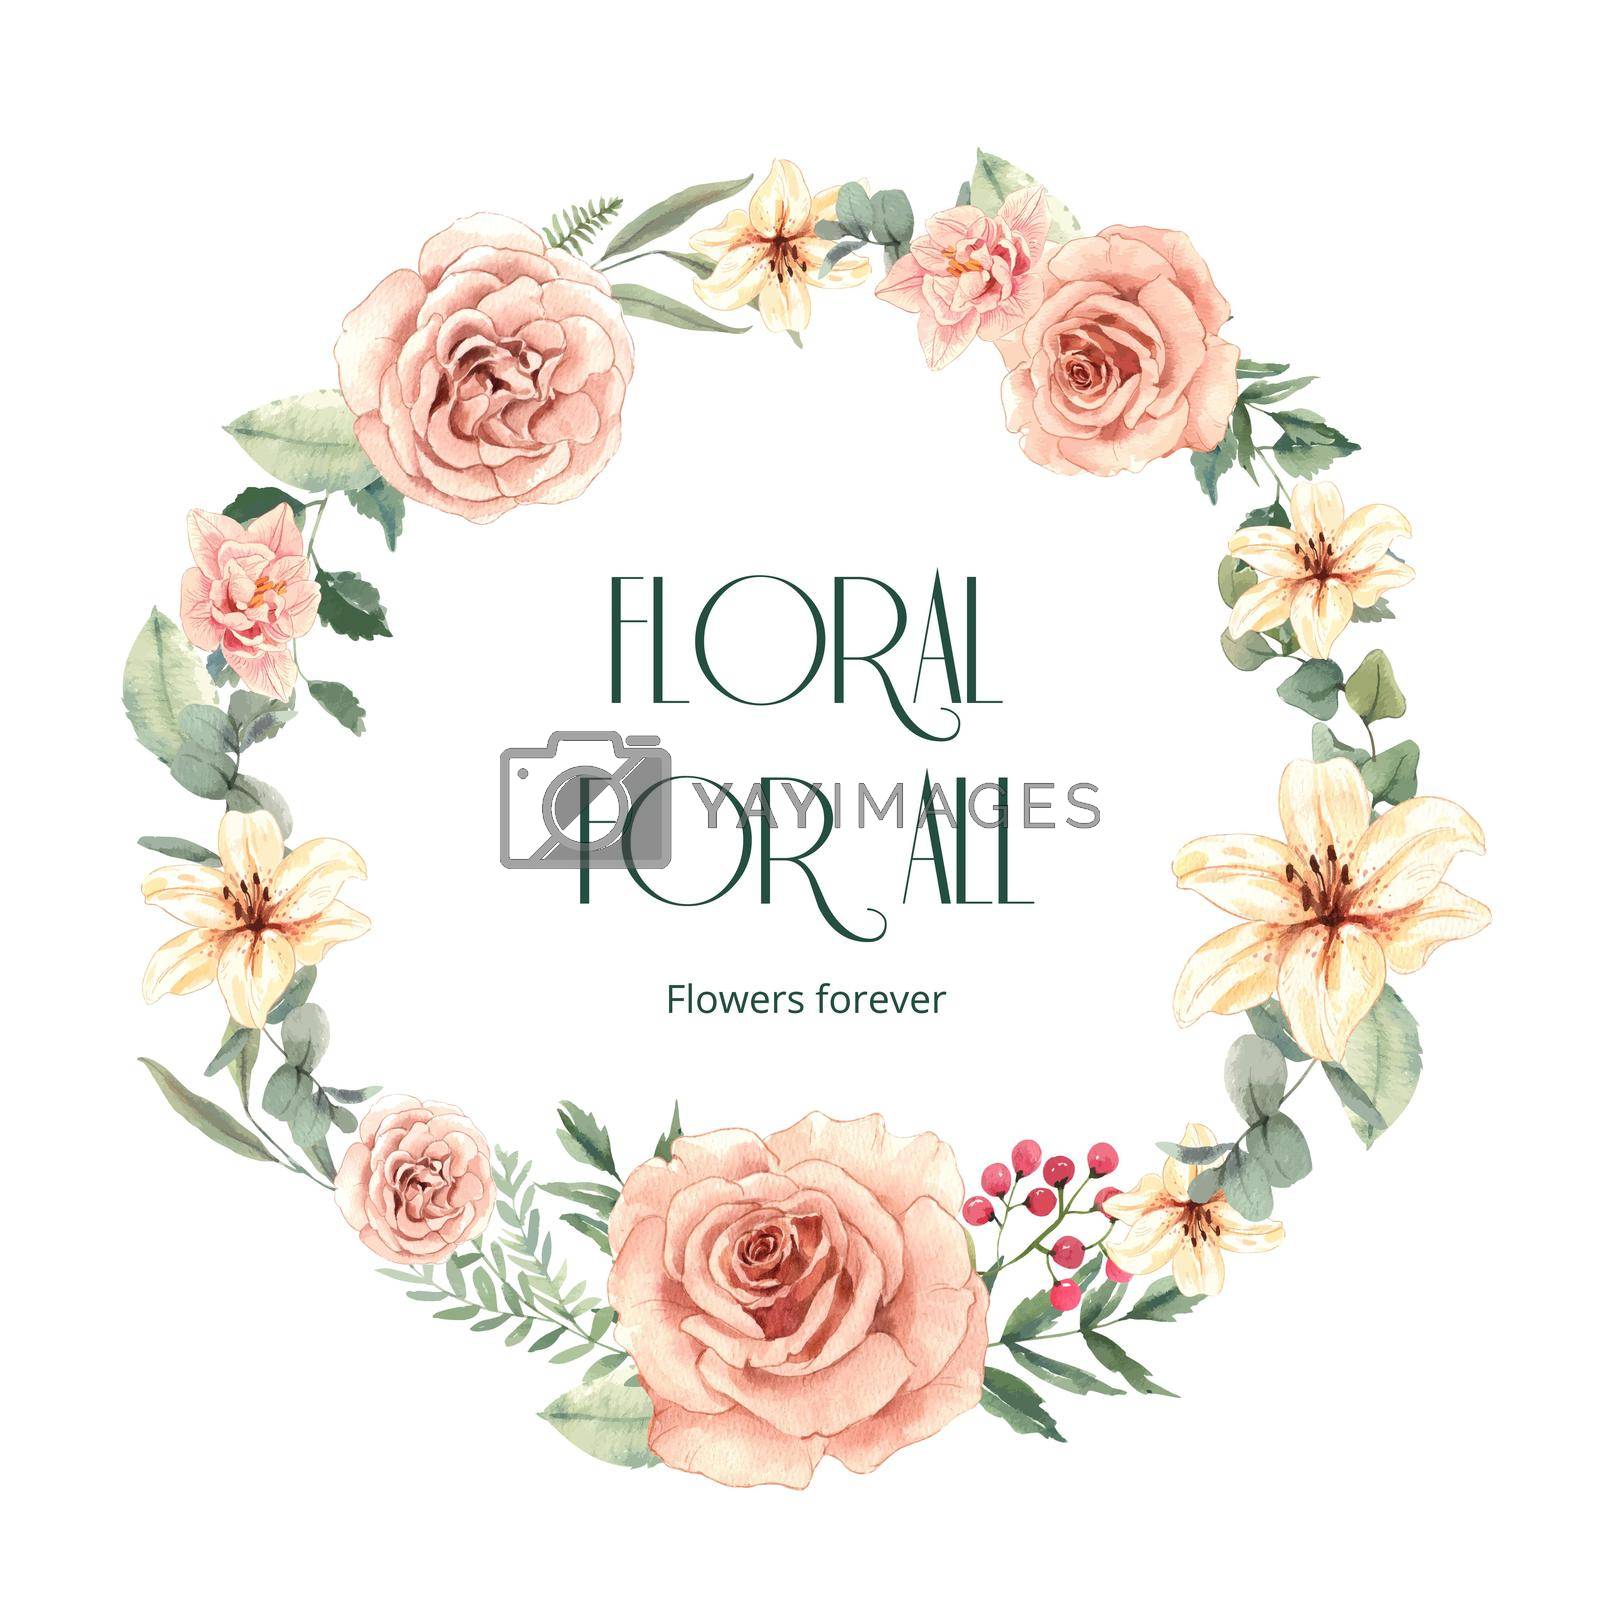 Royalty free image of Wreath template with gorgeous flower moody concept,watercolor style by Photographeeasia